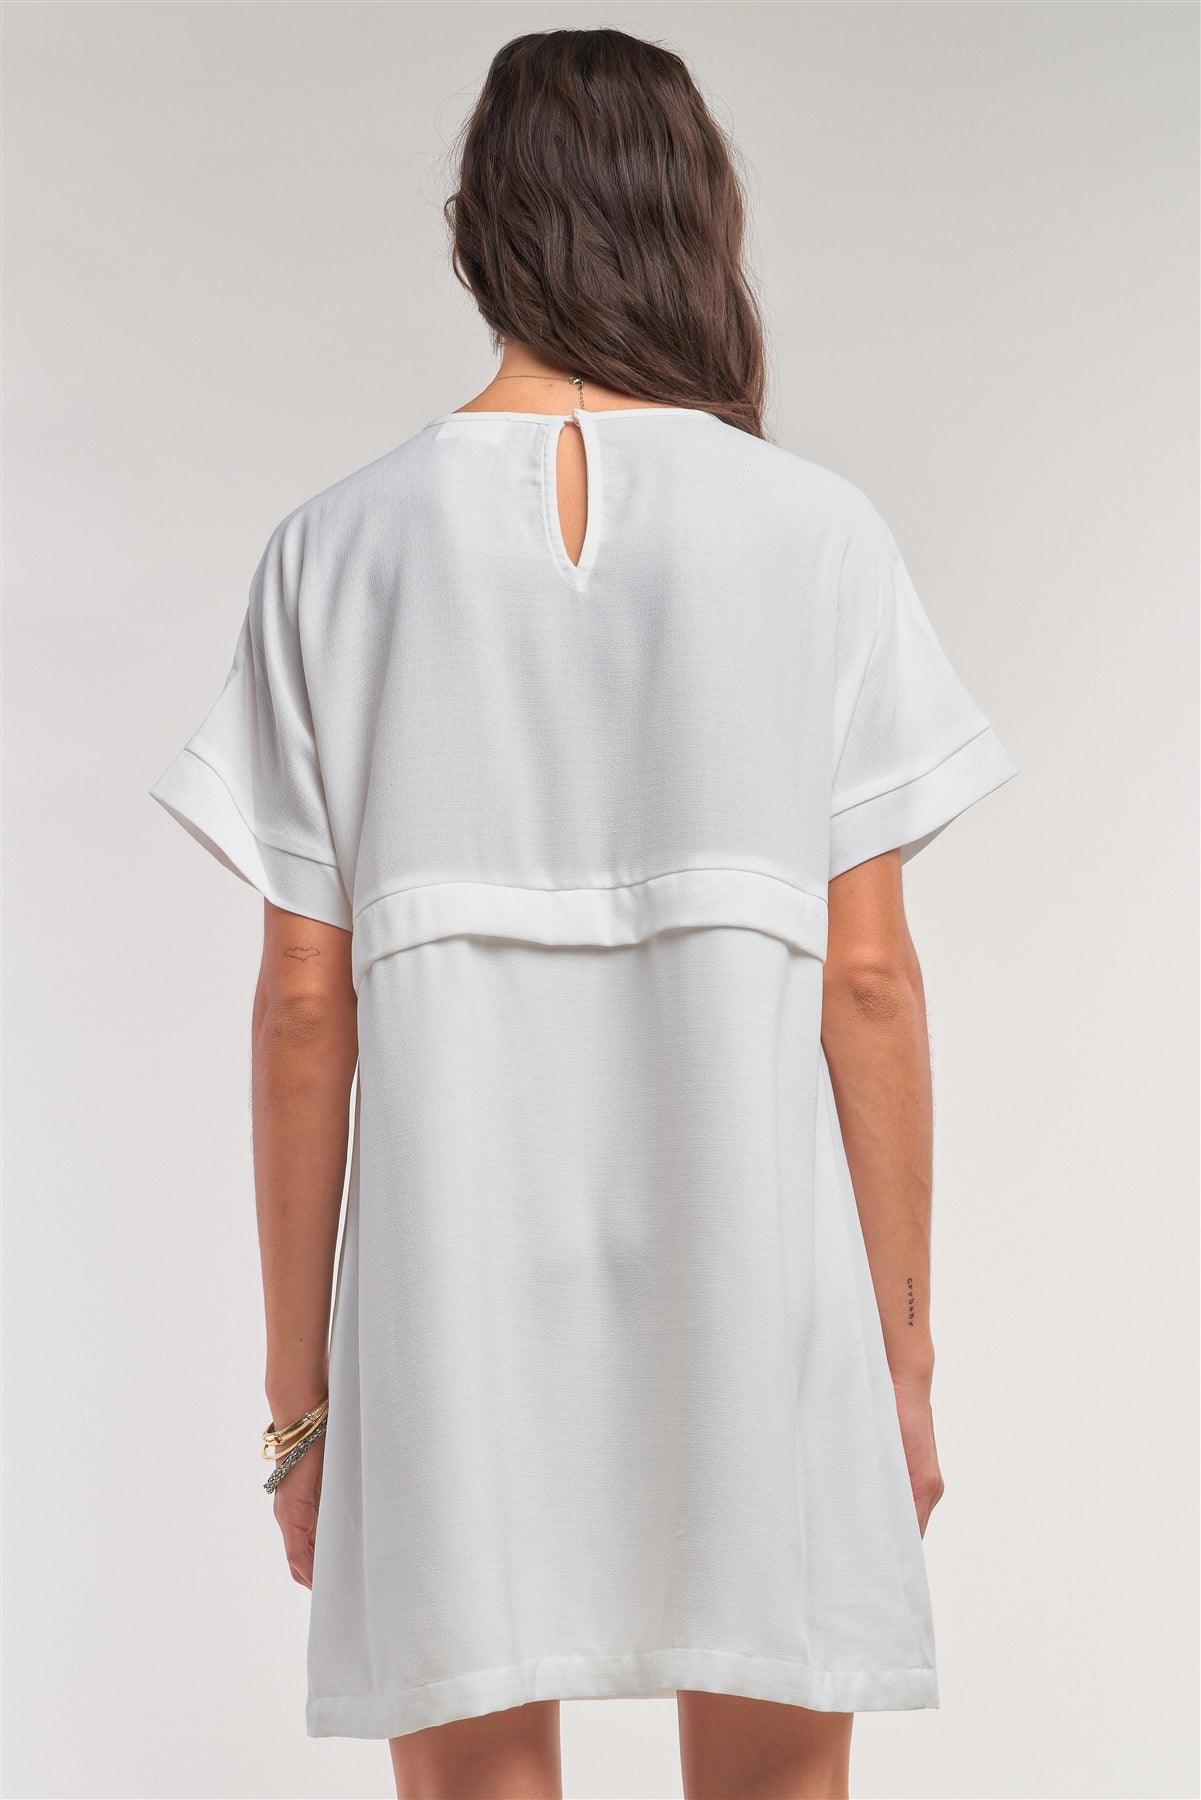 Off-White Short Sleeve Relaxed Fit Draw String Tie Waist Detail Mini Dress /1-2-2-1